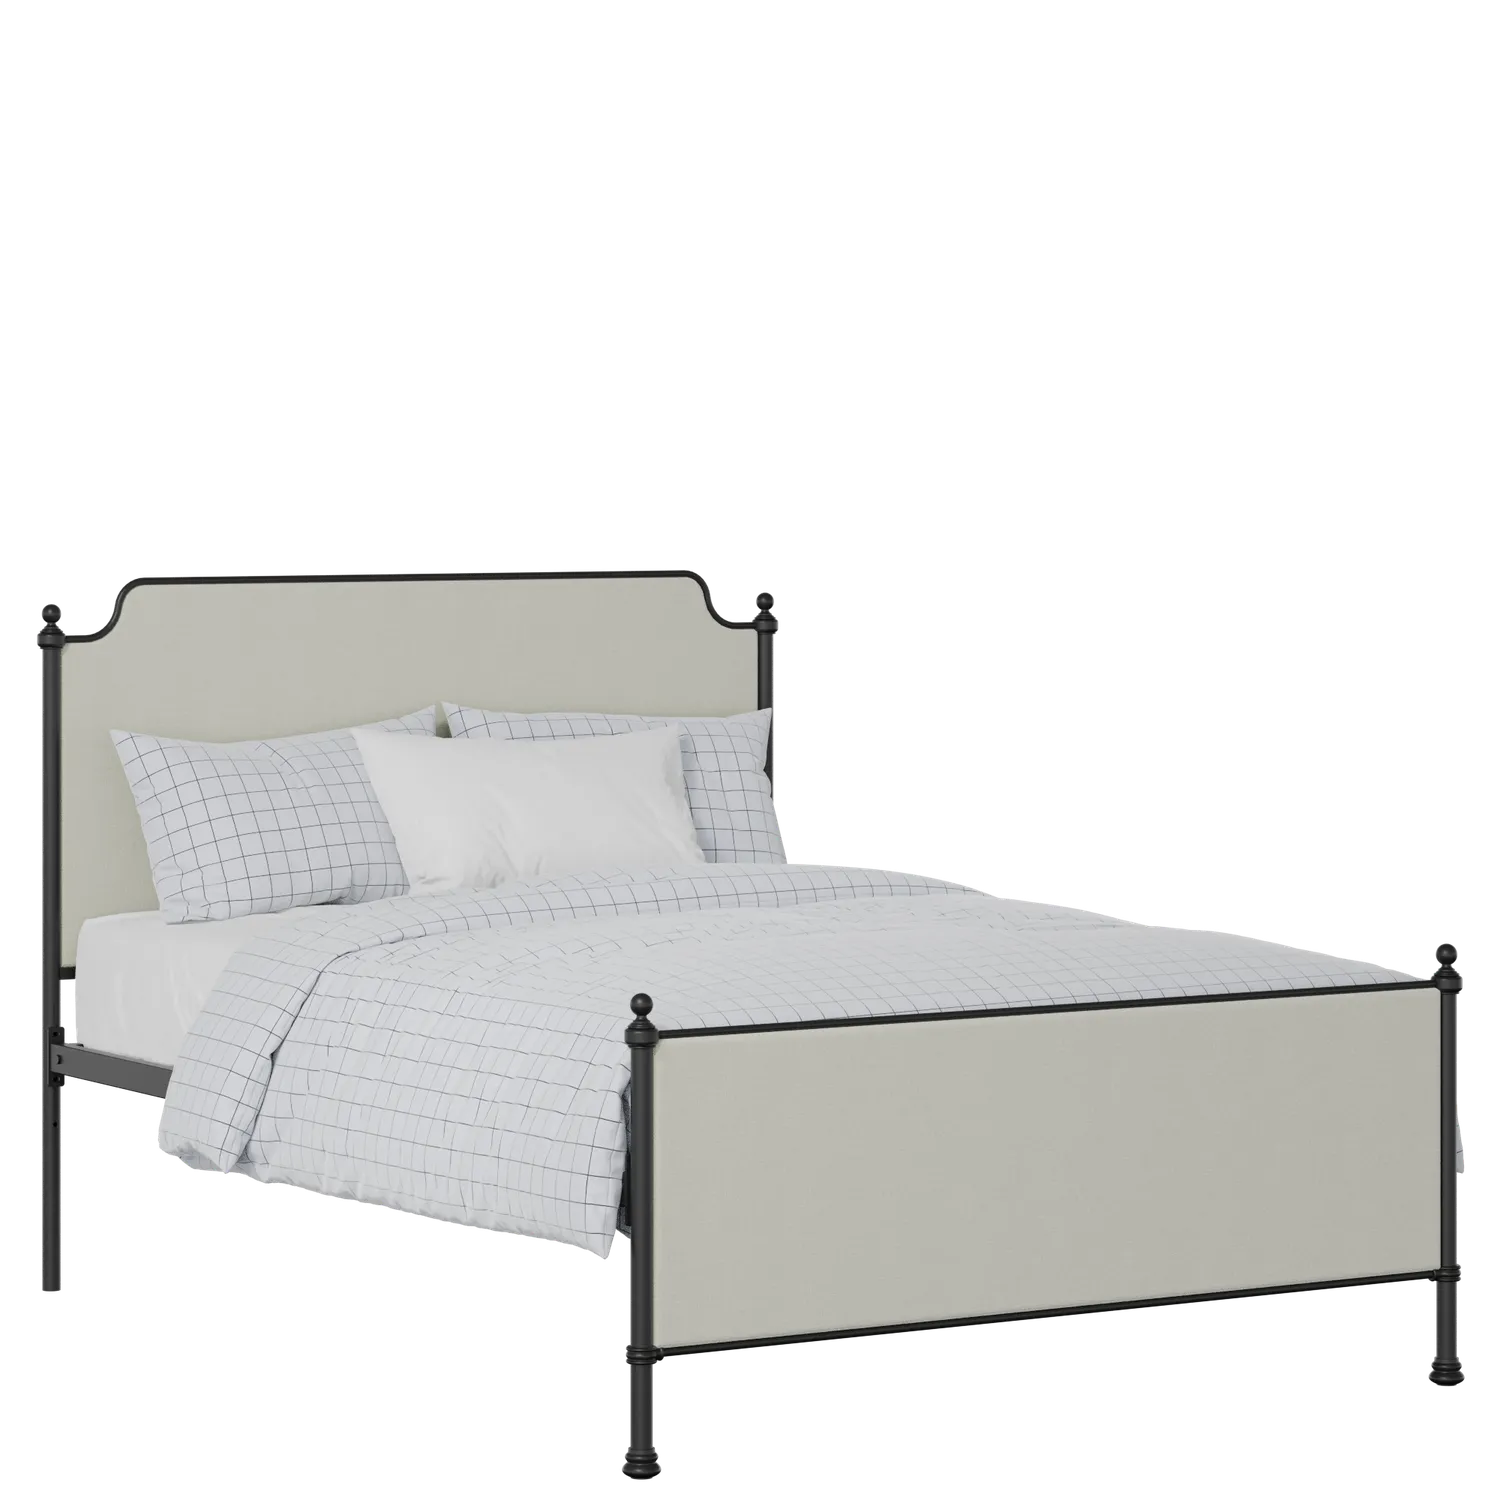 Miranda iron/metal upholstered bed in black with oatmeal fabric